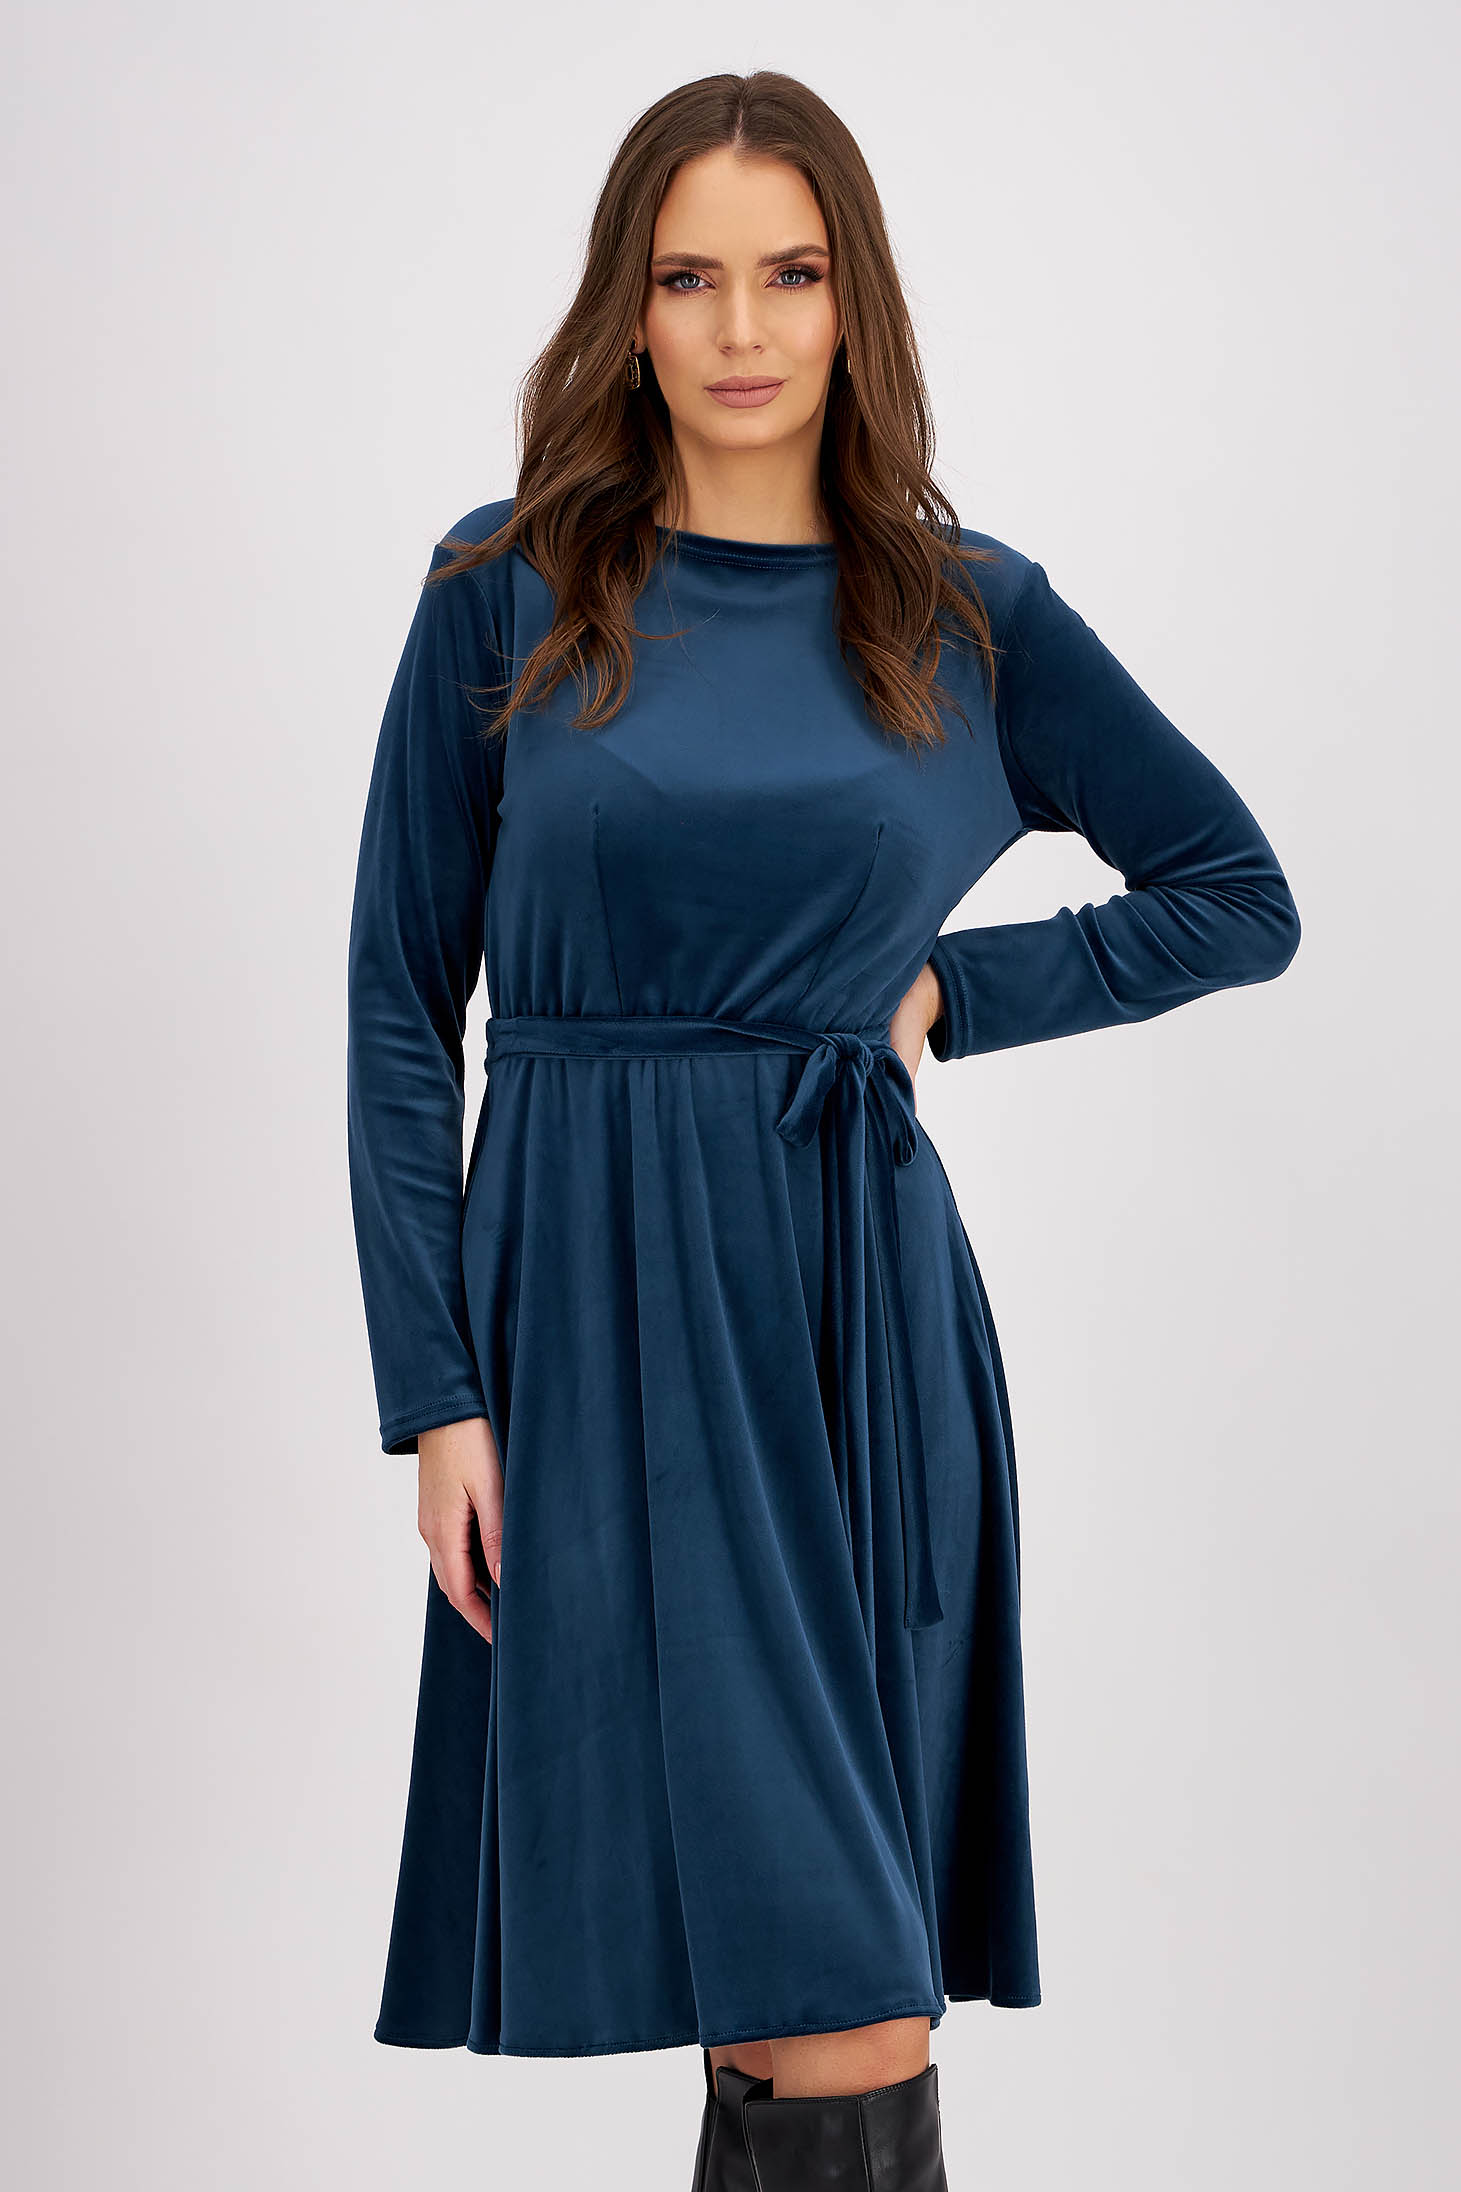 Velvet midi dress in petrol blue with a flared knee-length cut and elastic waistband, accessorized with a belt - StarShinerS